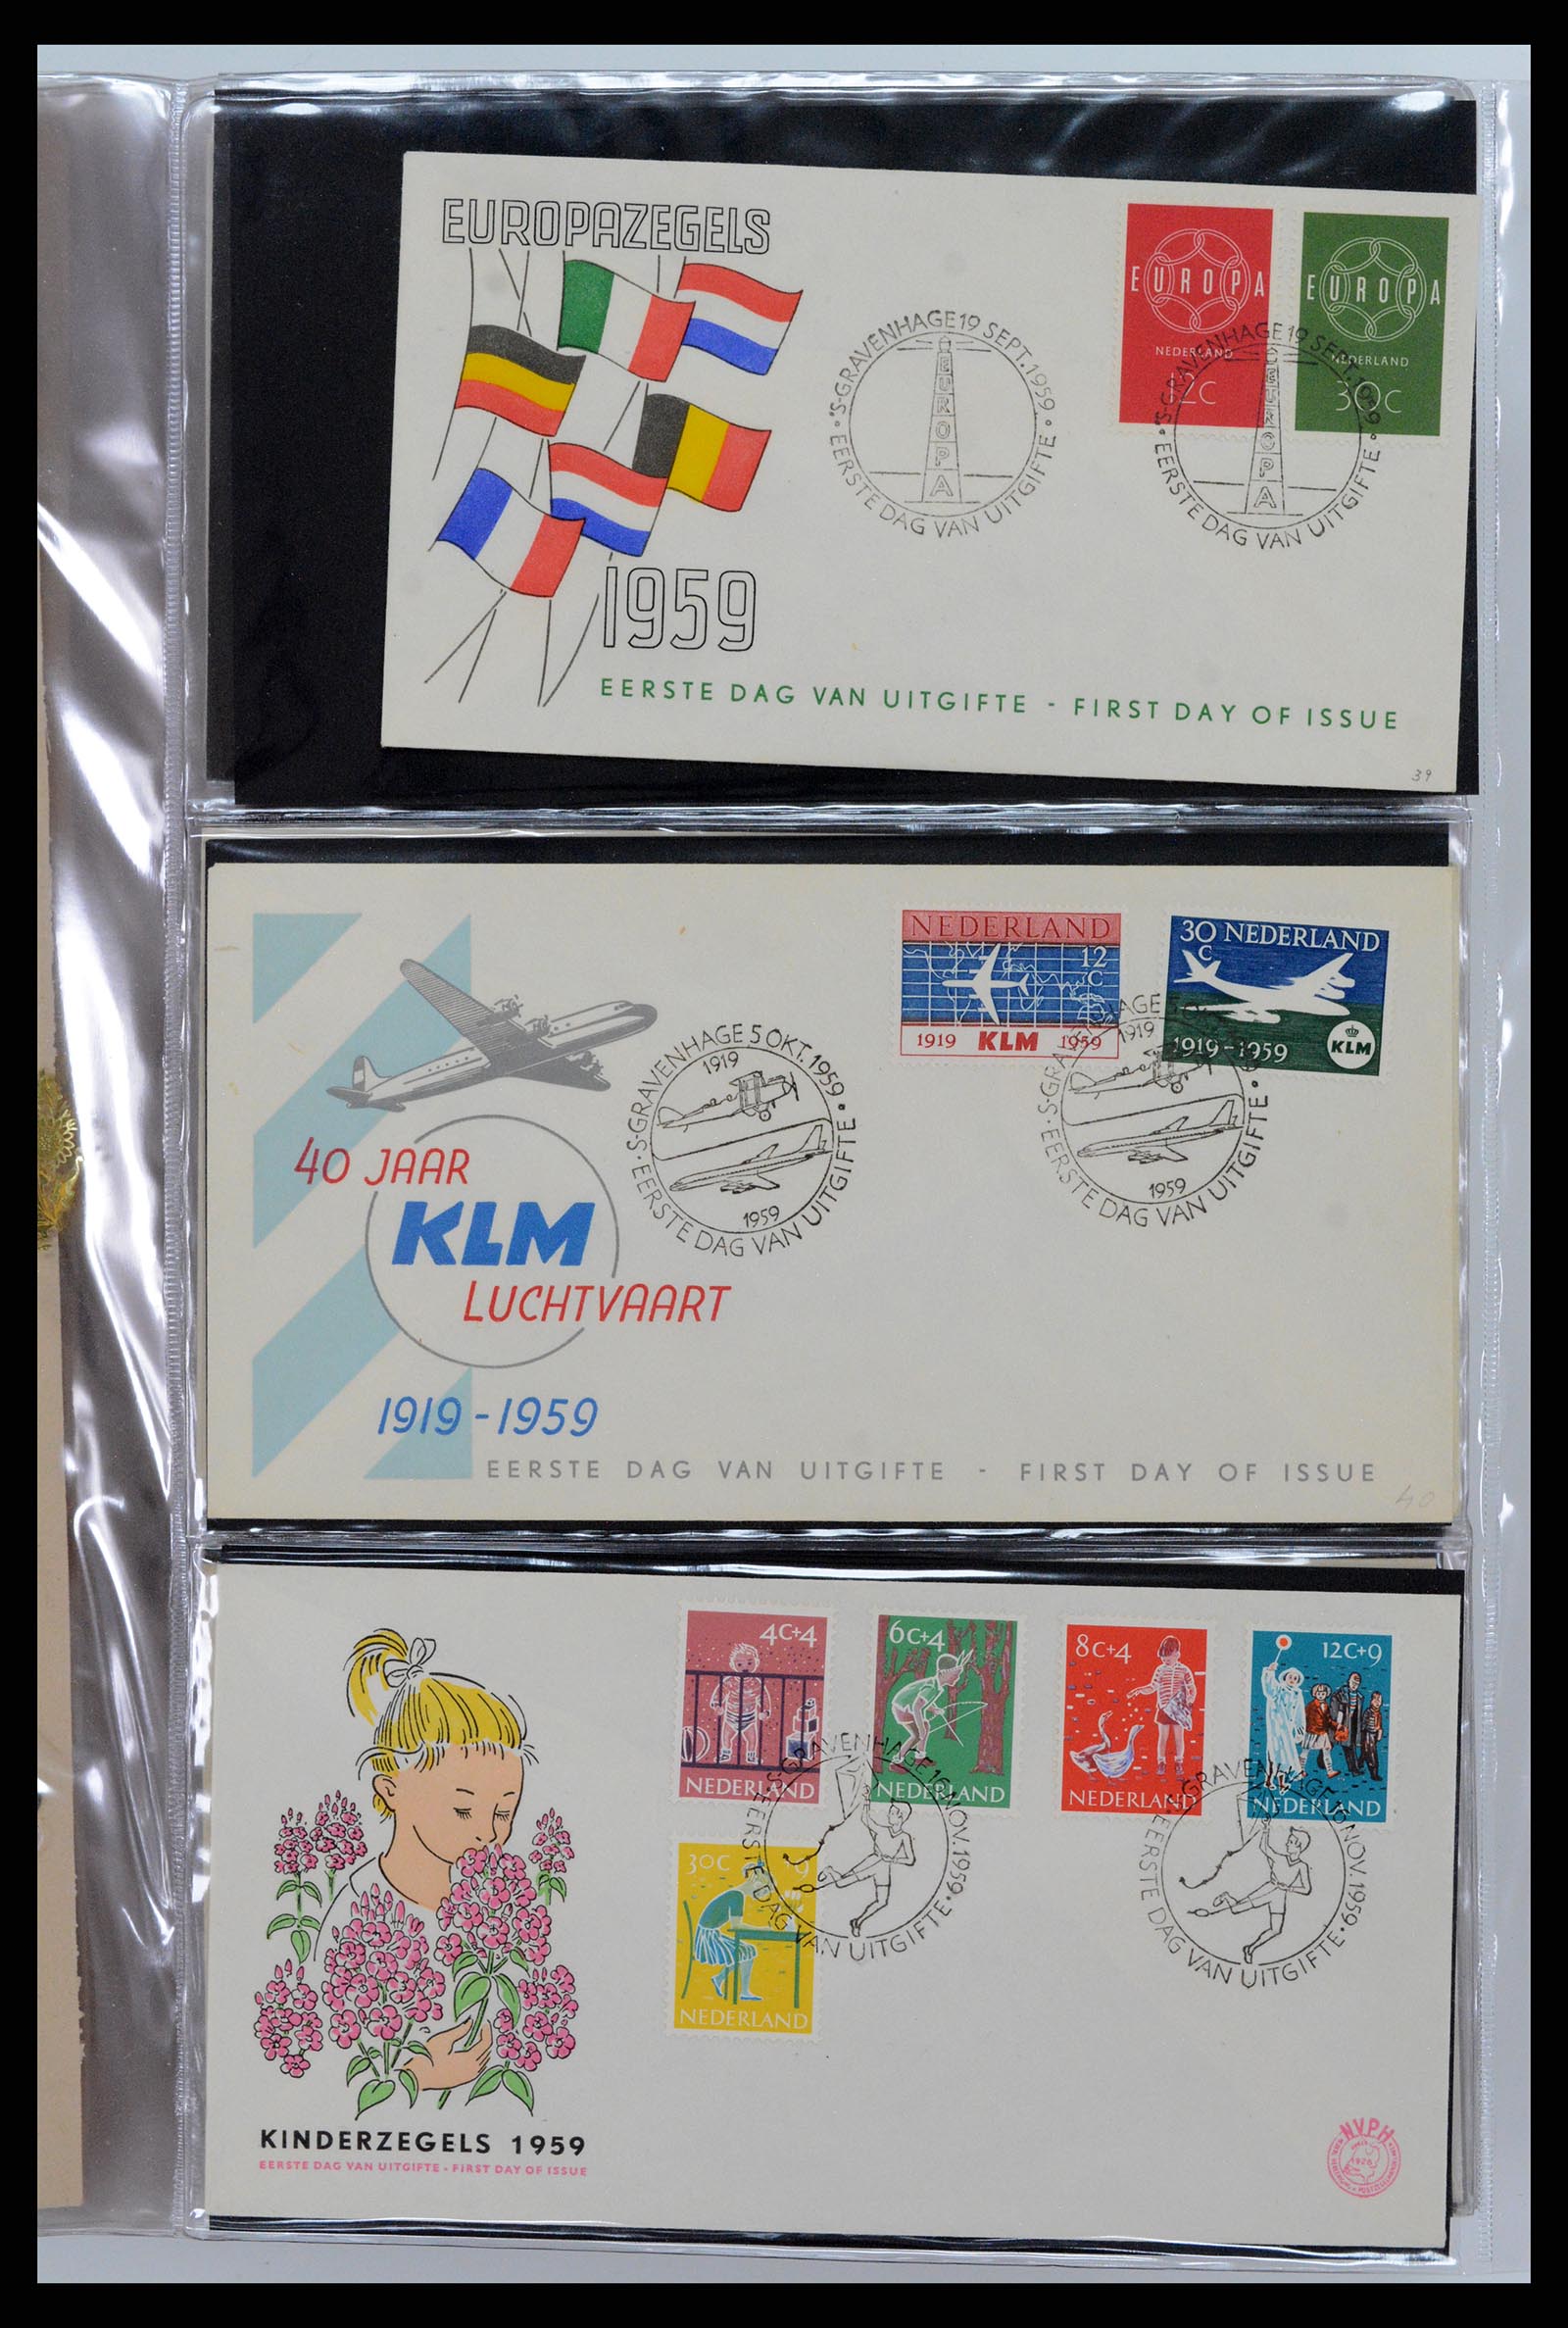 37461 014 - Stamp collection 37461 Netherlands FDC's 1950-2014.